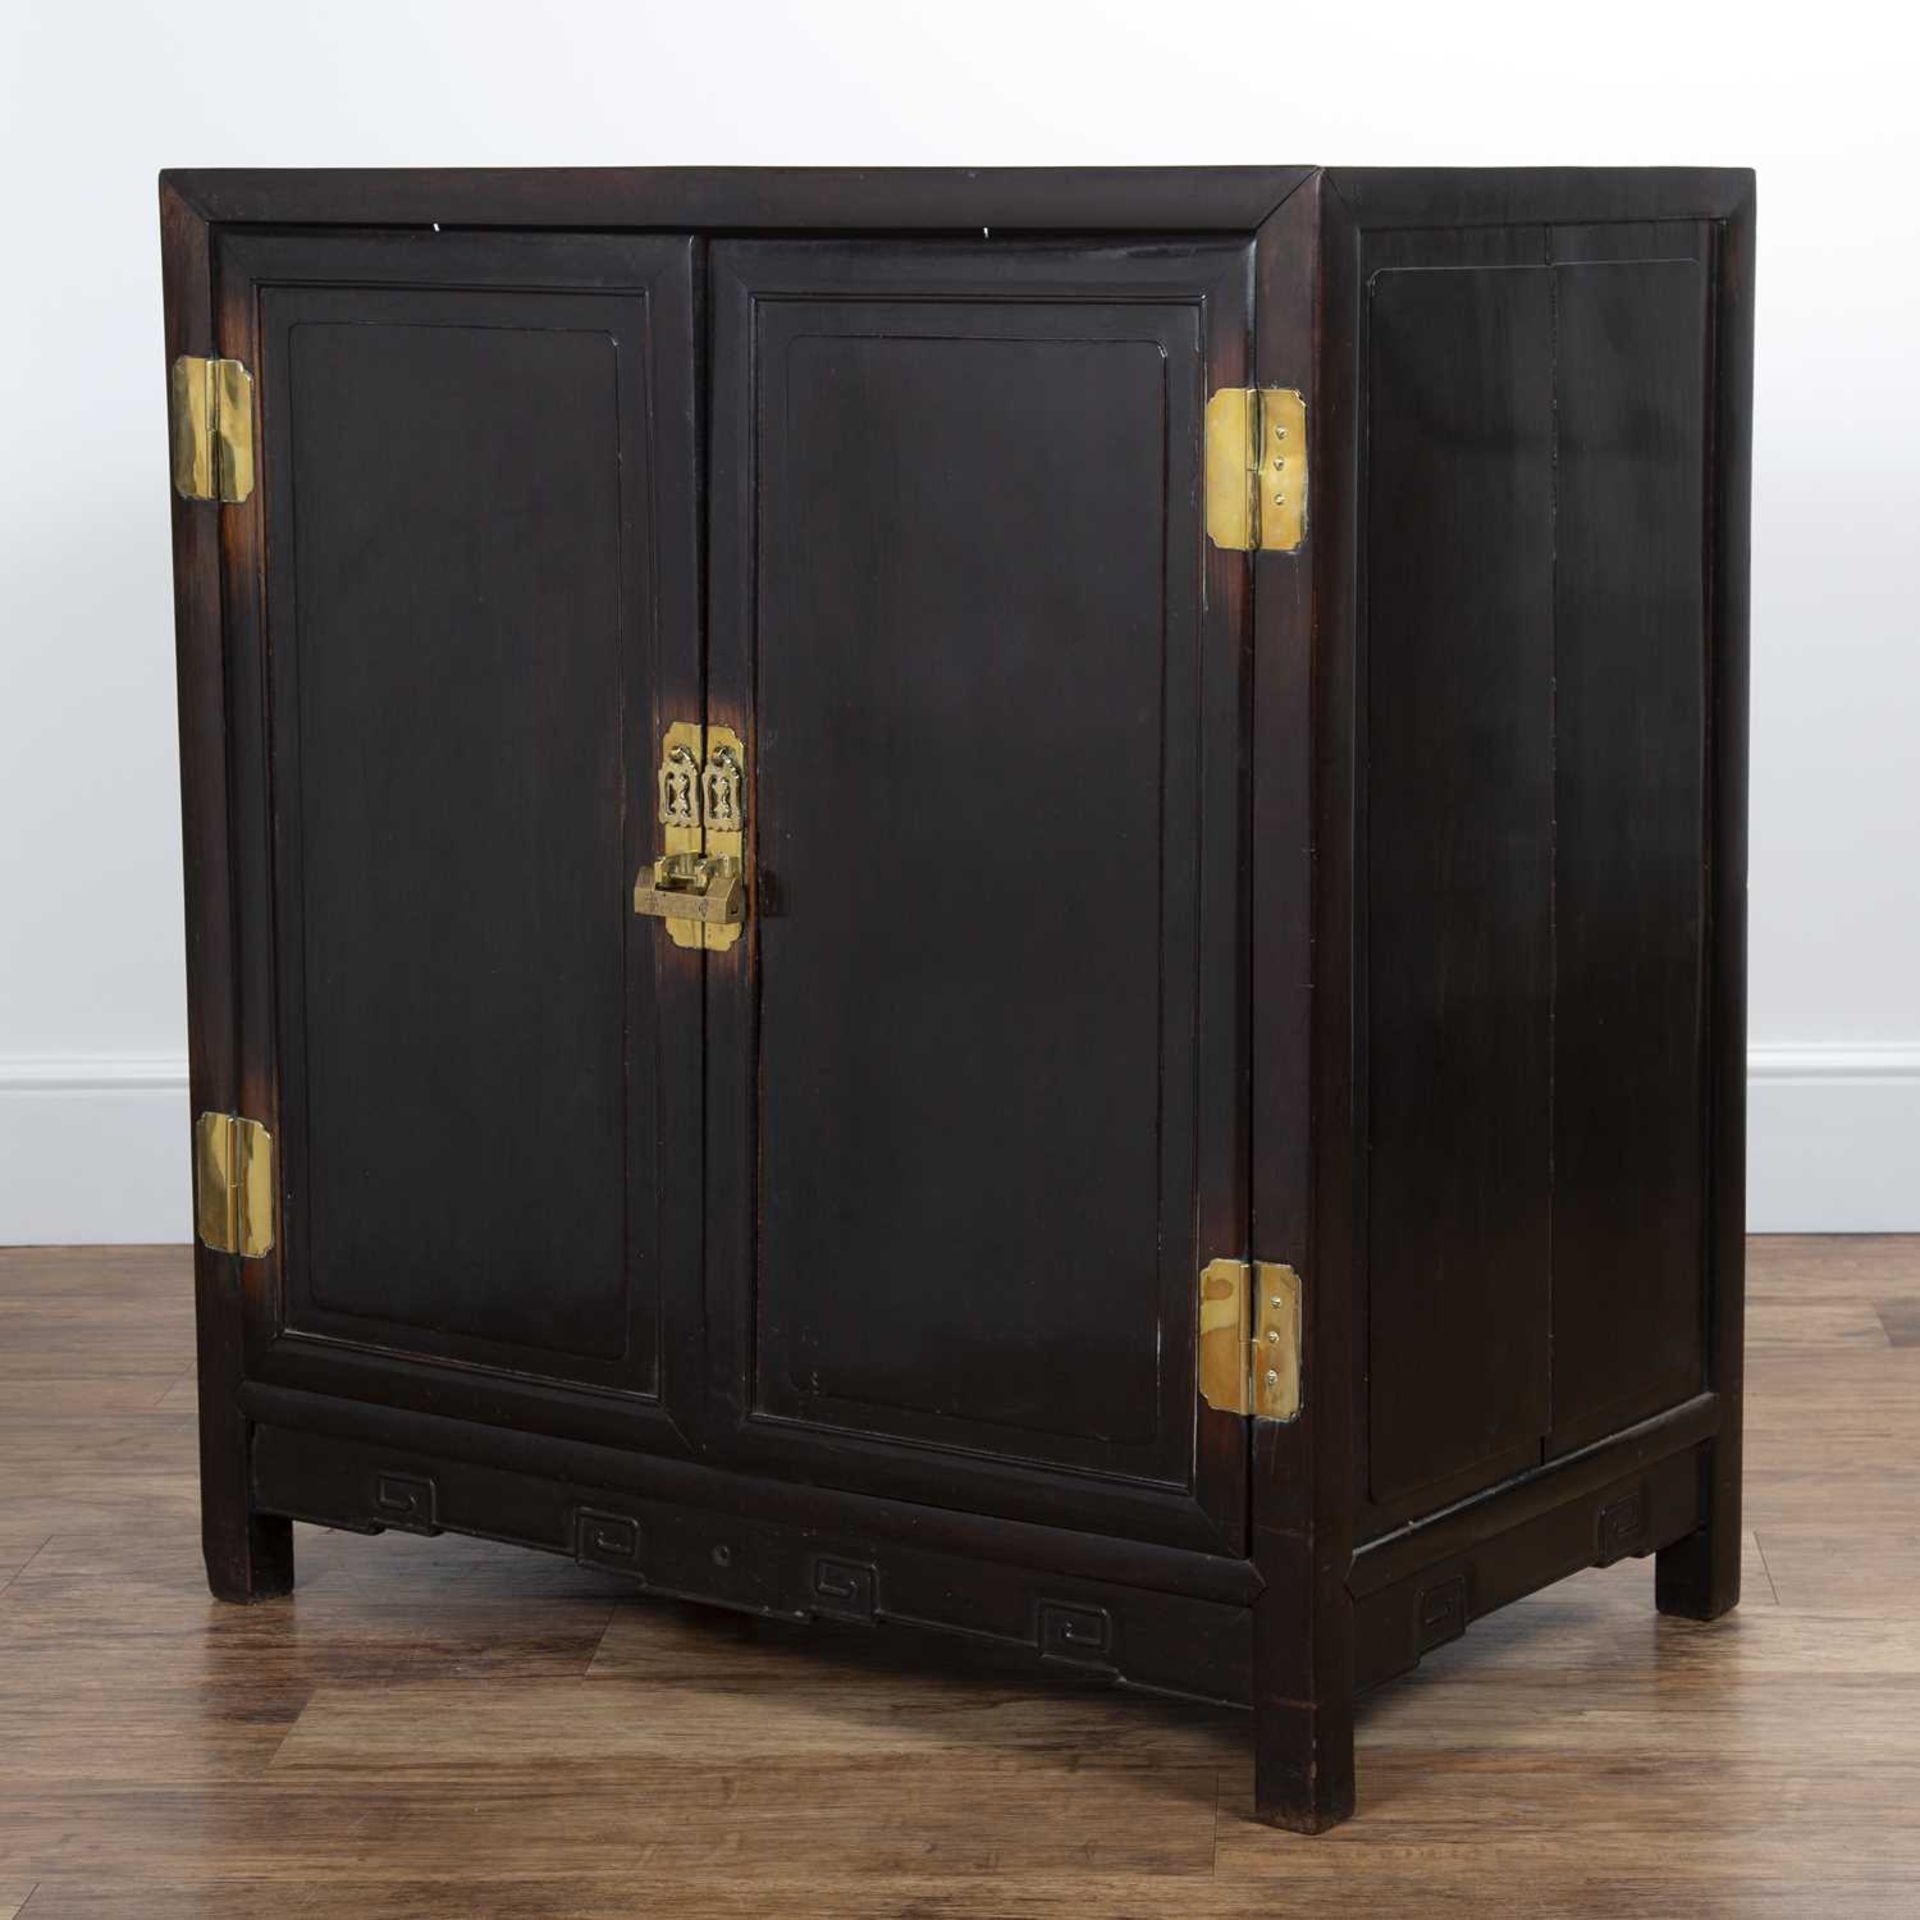 Zitan wood cabinet Chinese, 19th Century, with plain panel doors and with brass locks, 90cm wide x - Image 3 of 7